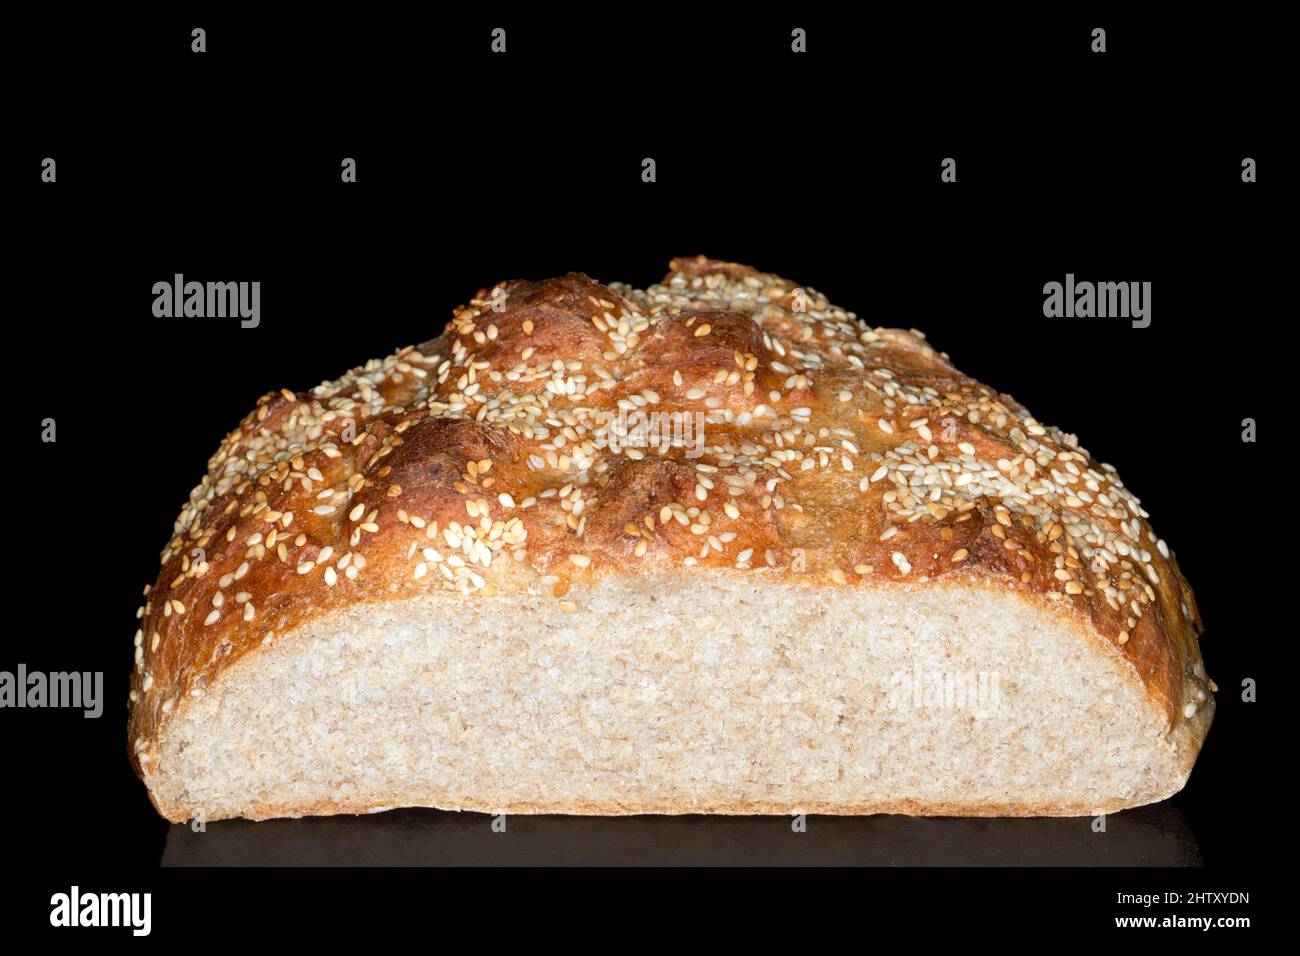 Cut bread with sesame seeds, studio photography with black background Stock Photo